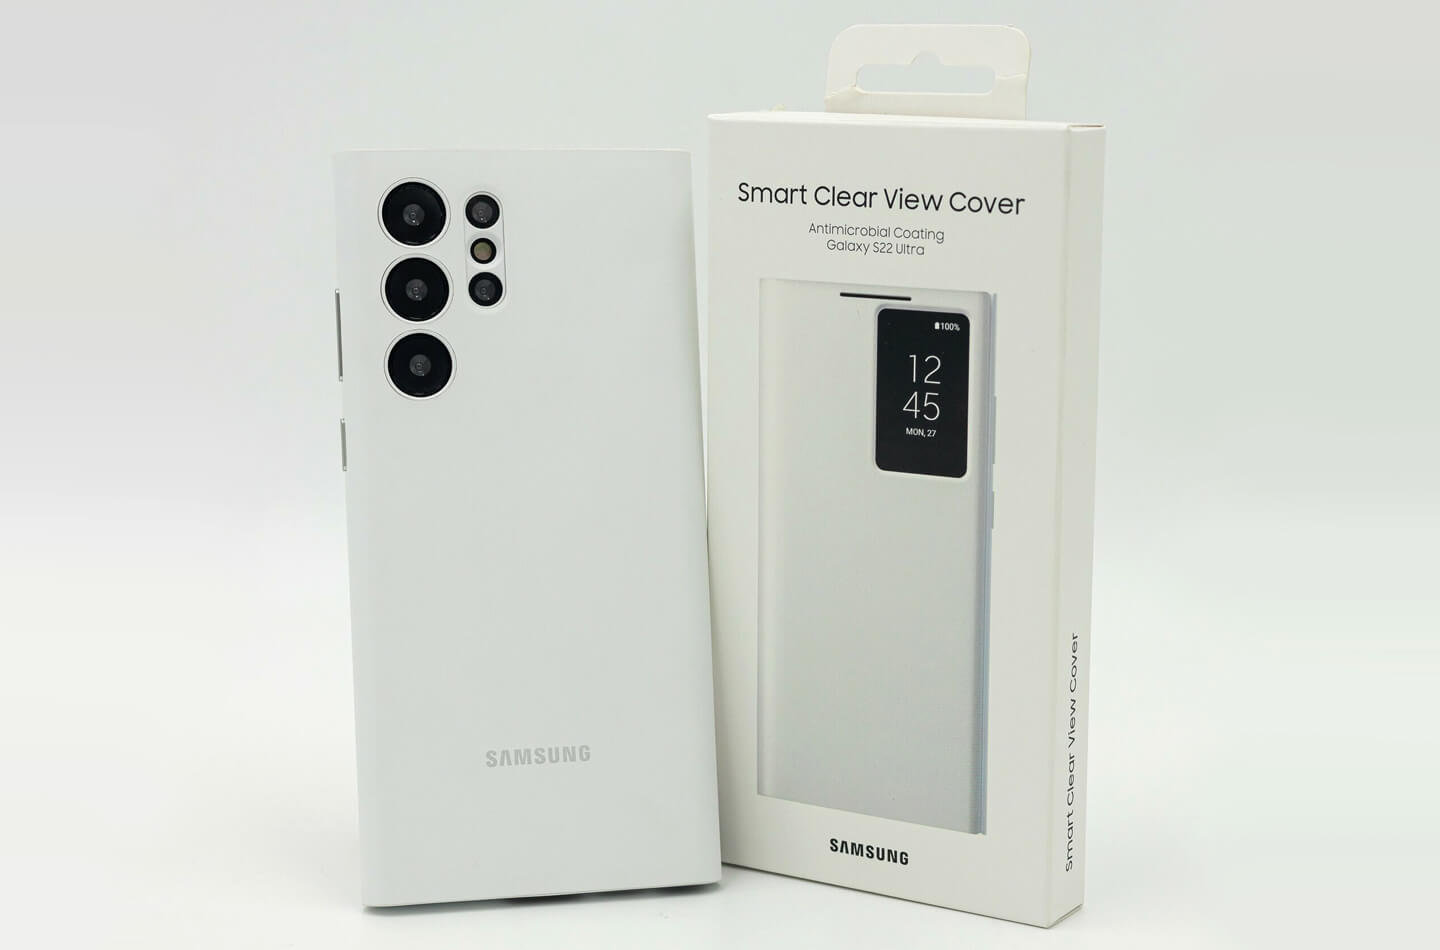 Samsung Galaxy S22 Ultra smart clear view cover